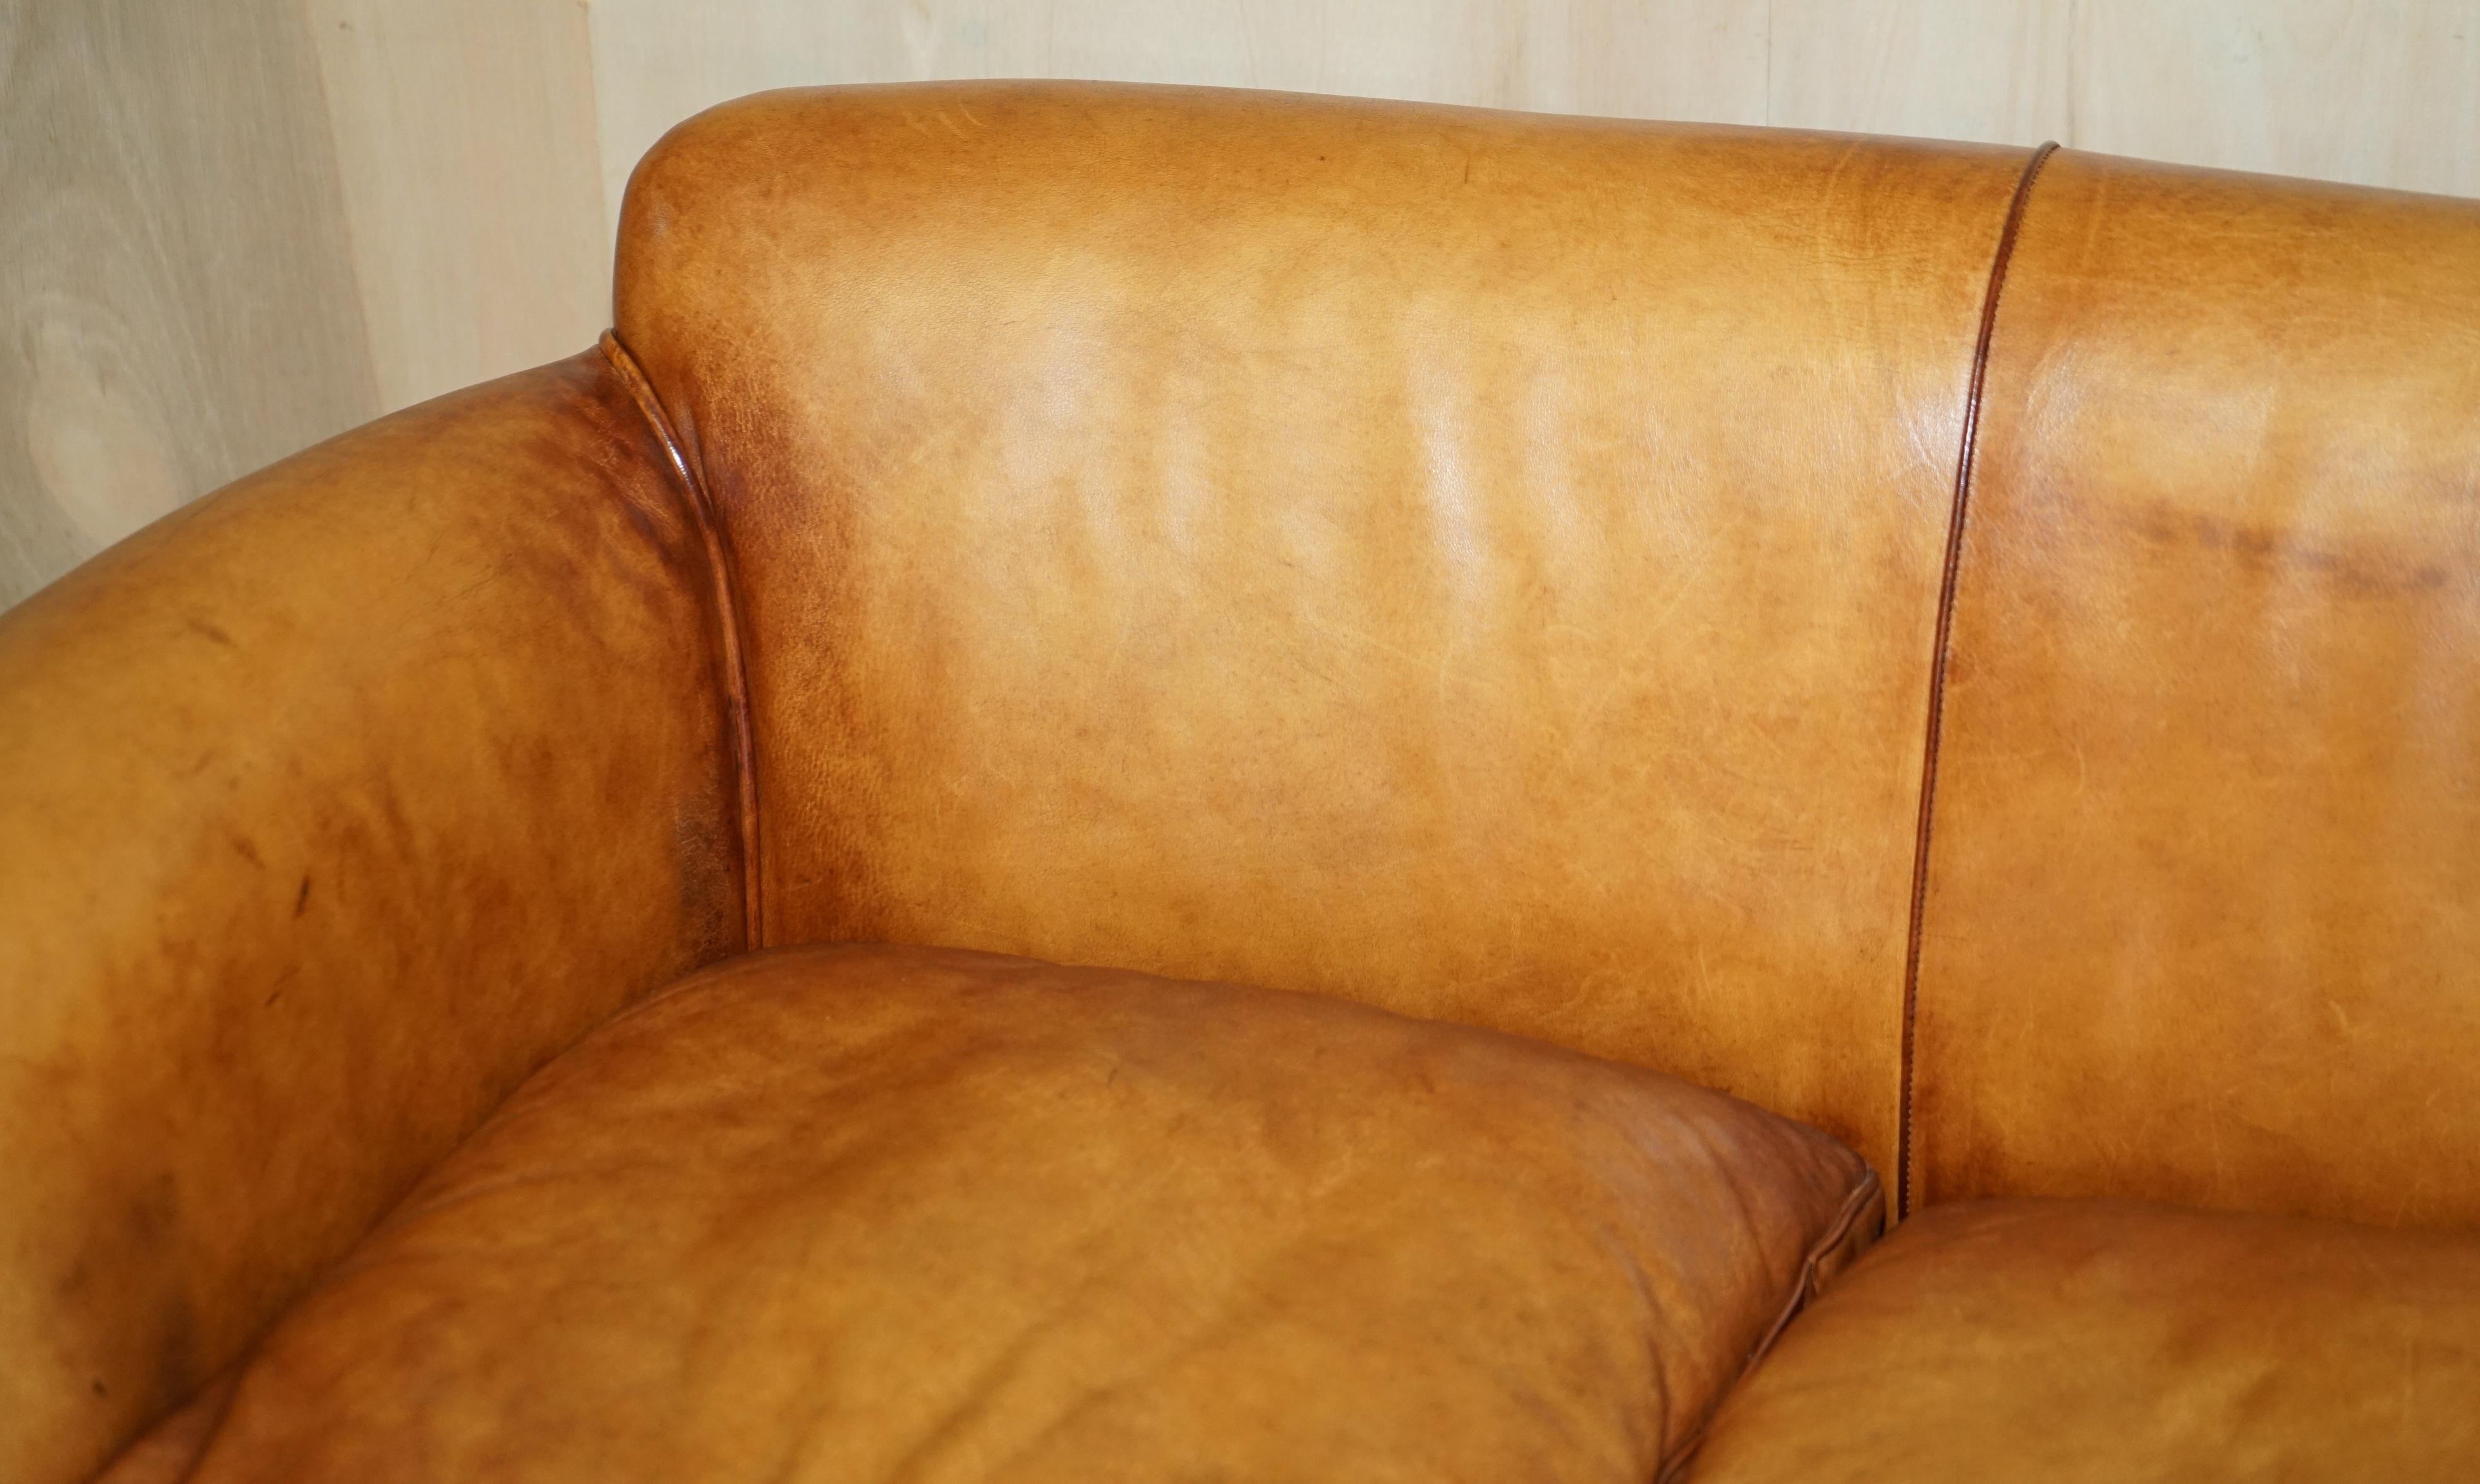 Rare John Lewis Camford Heritage Brown Leather Armchair & Two Seat Sofa Suite For Sale 5